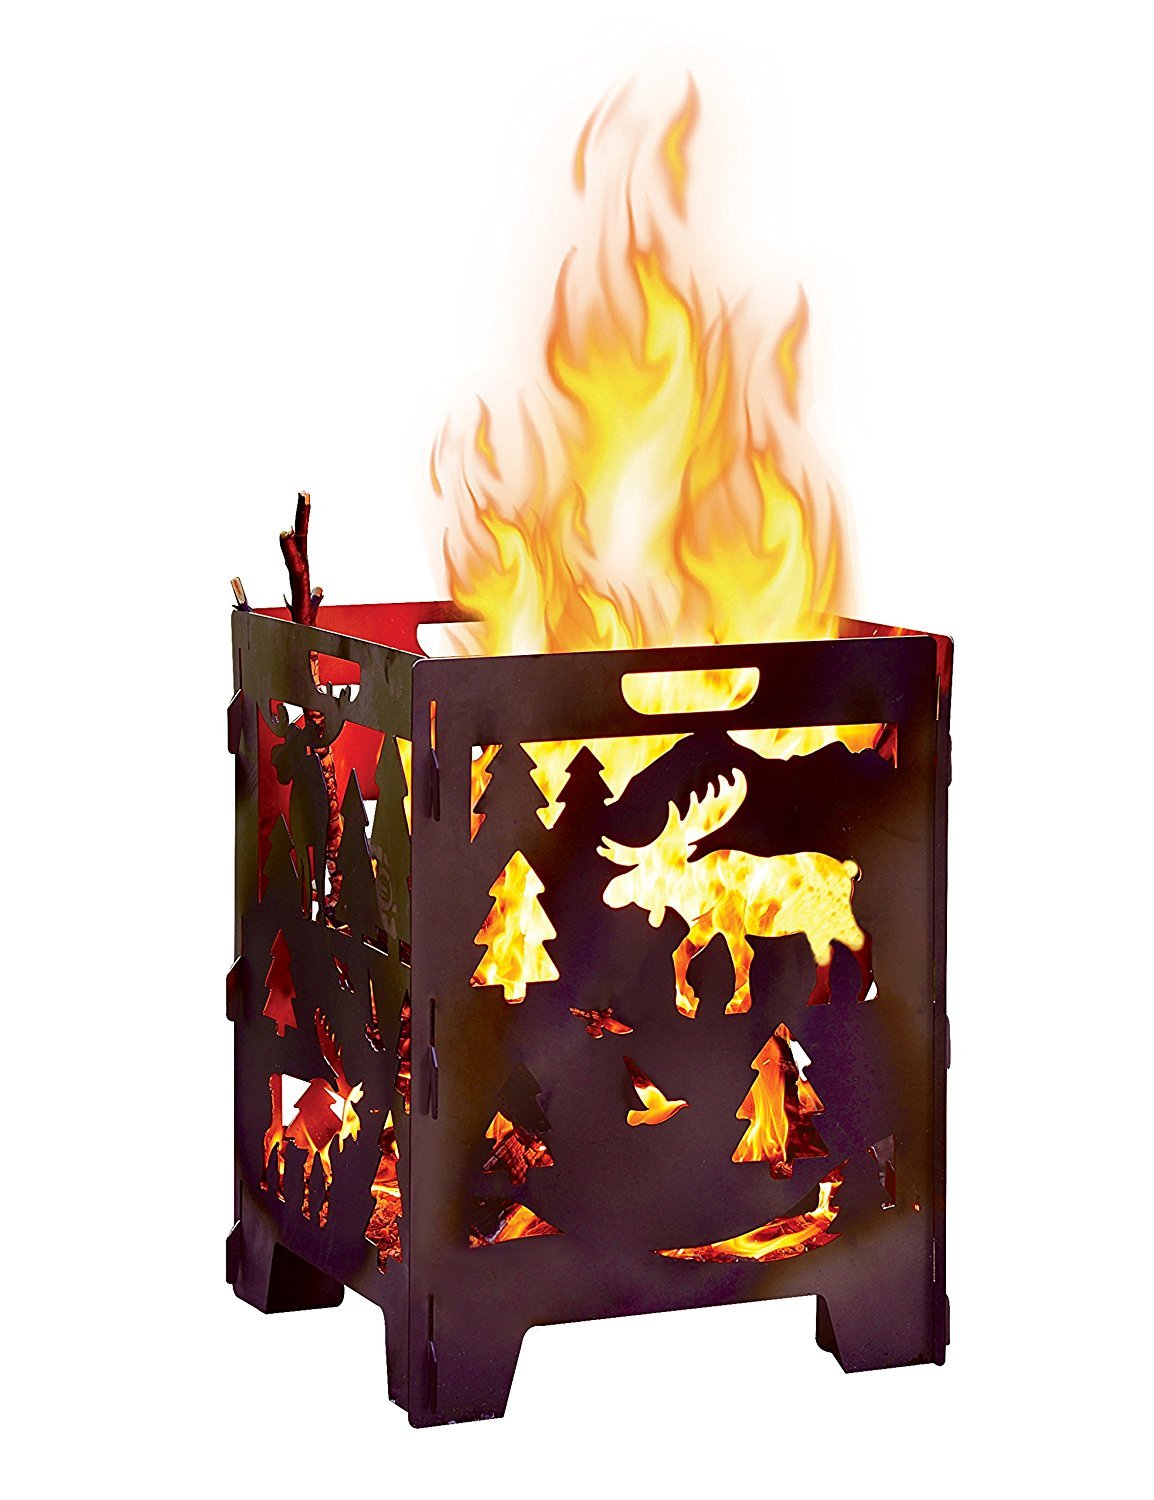 Plow and Hearth Fireplace Screens Fresh Amazon Moose Wood Burning Pit Burn Cage Incinerator